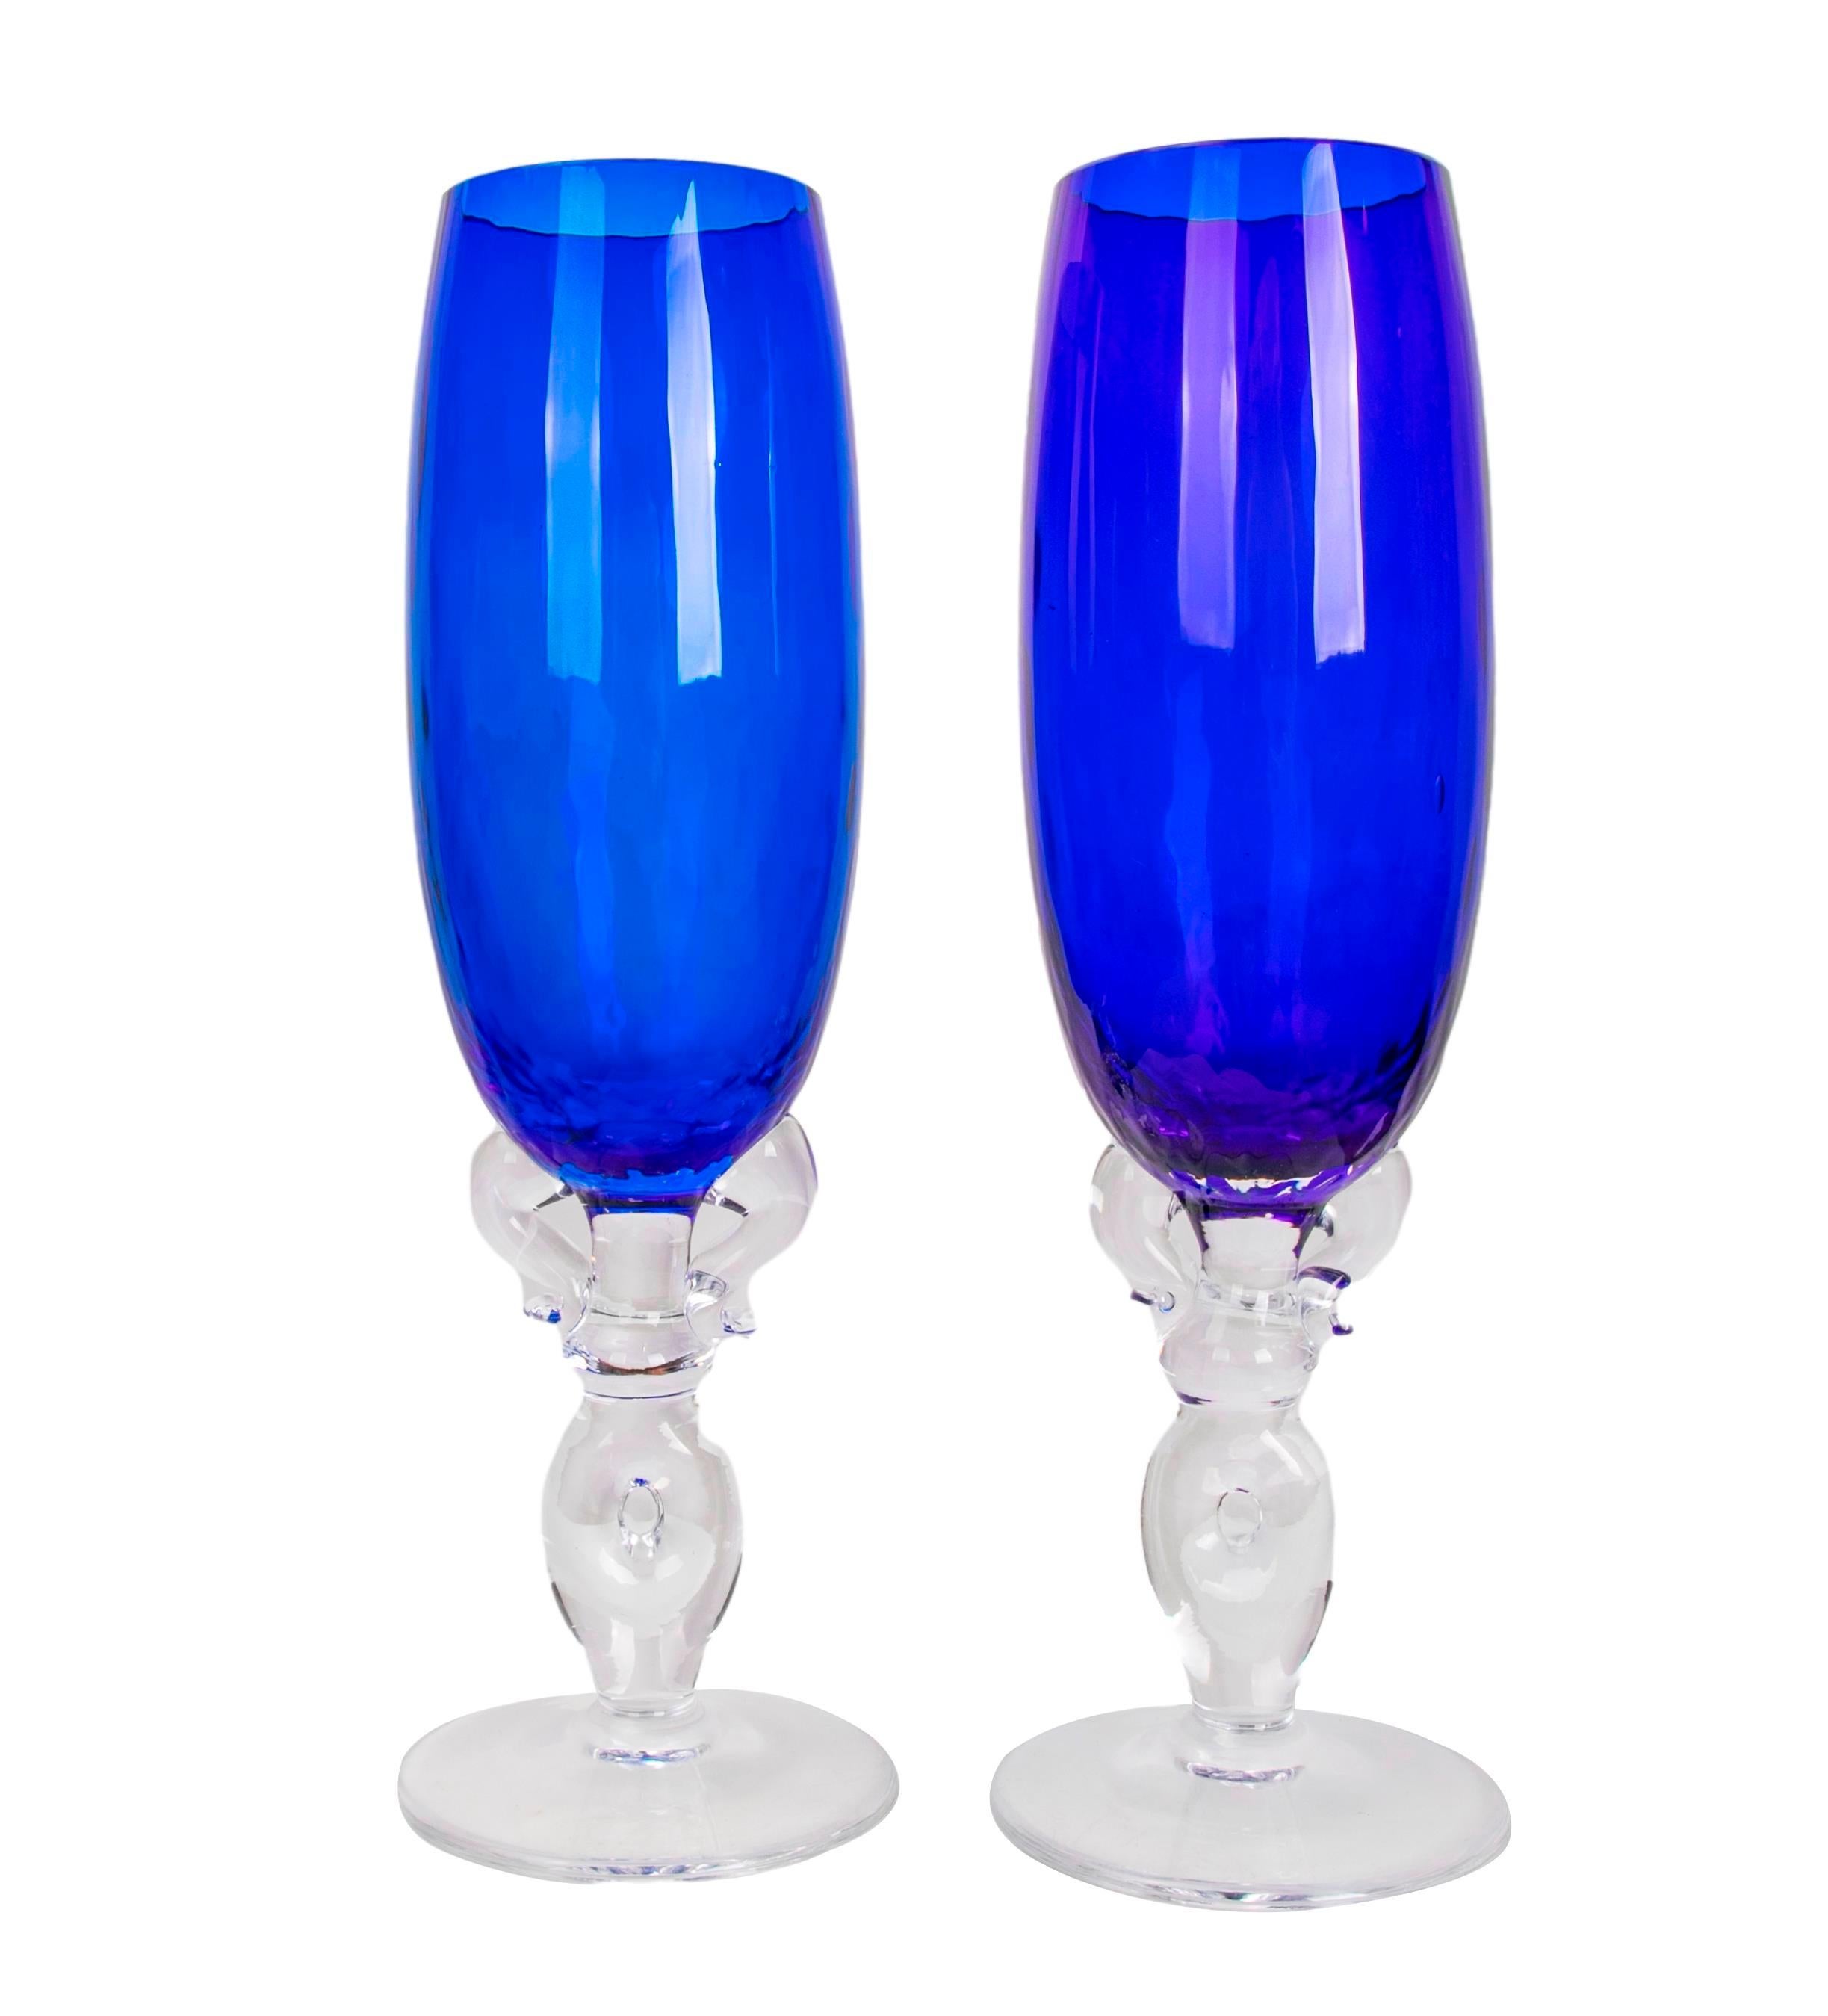 Thirty-four murano glass wine and champagne glasses in blue colour (18 wine glasses and 16 champagne glasses).